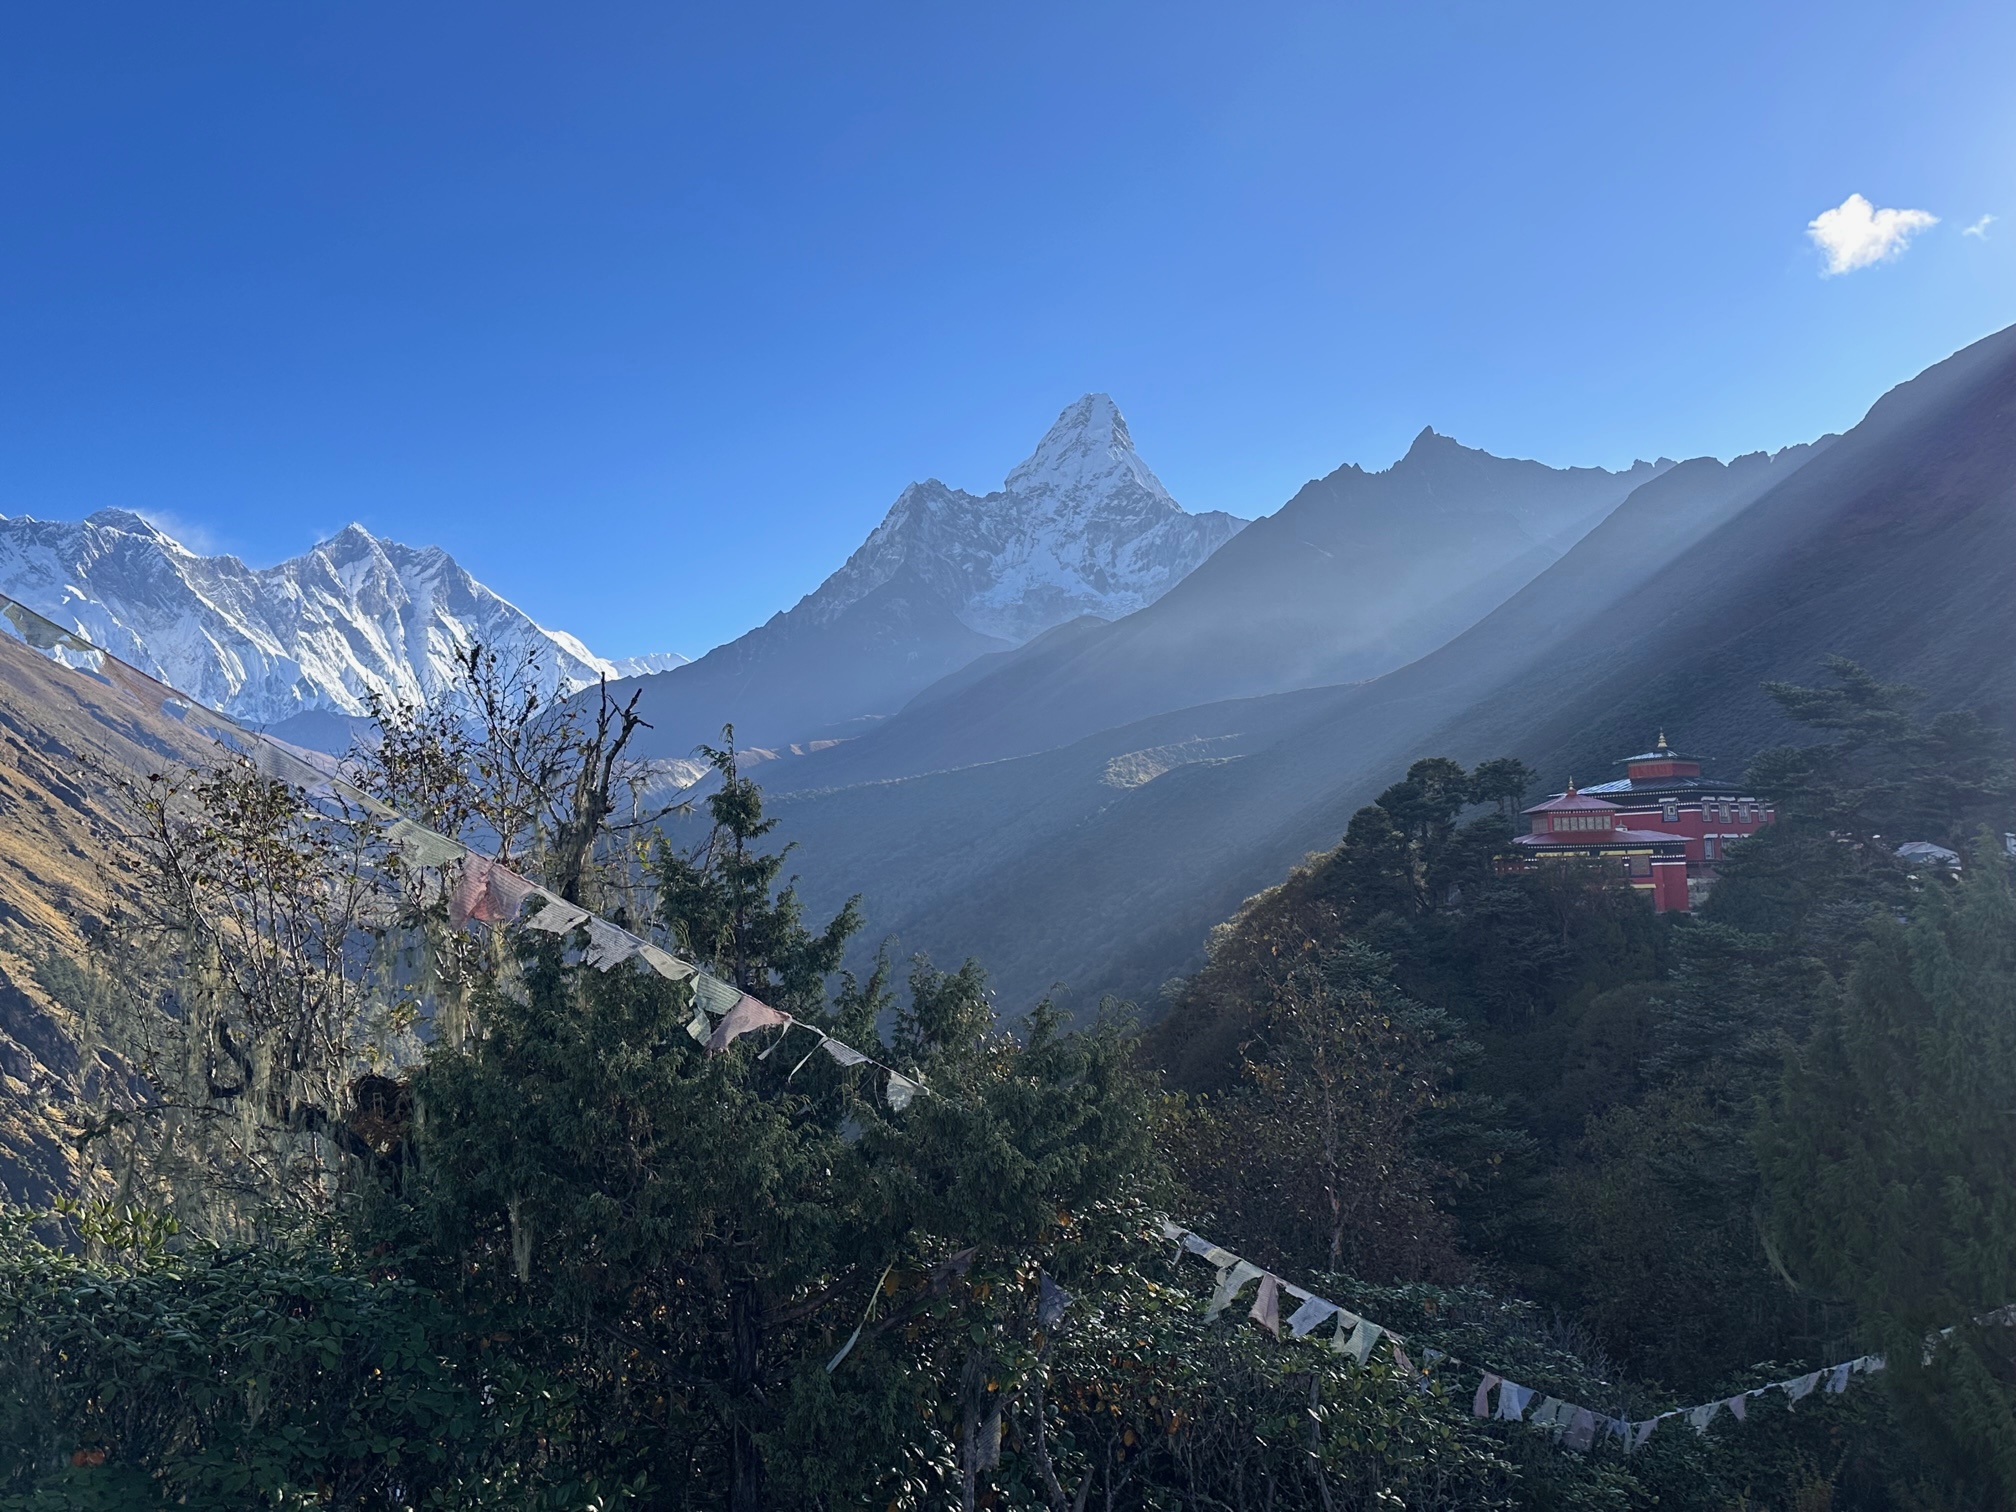 The reasons people are getting sick in the Everest region